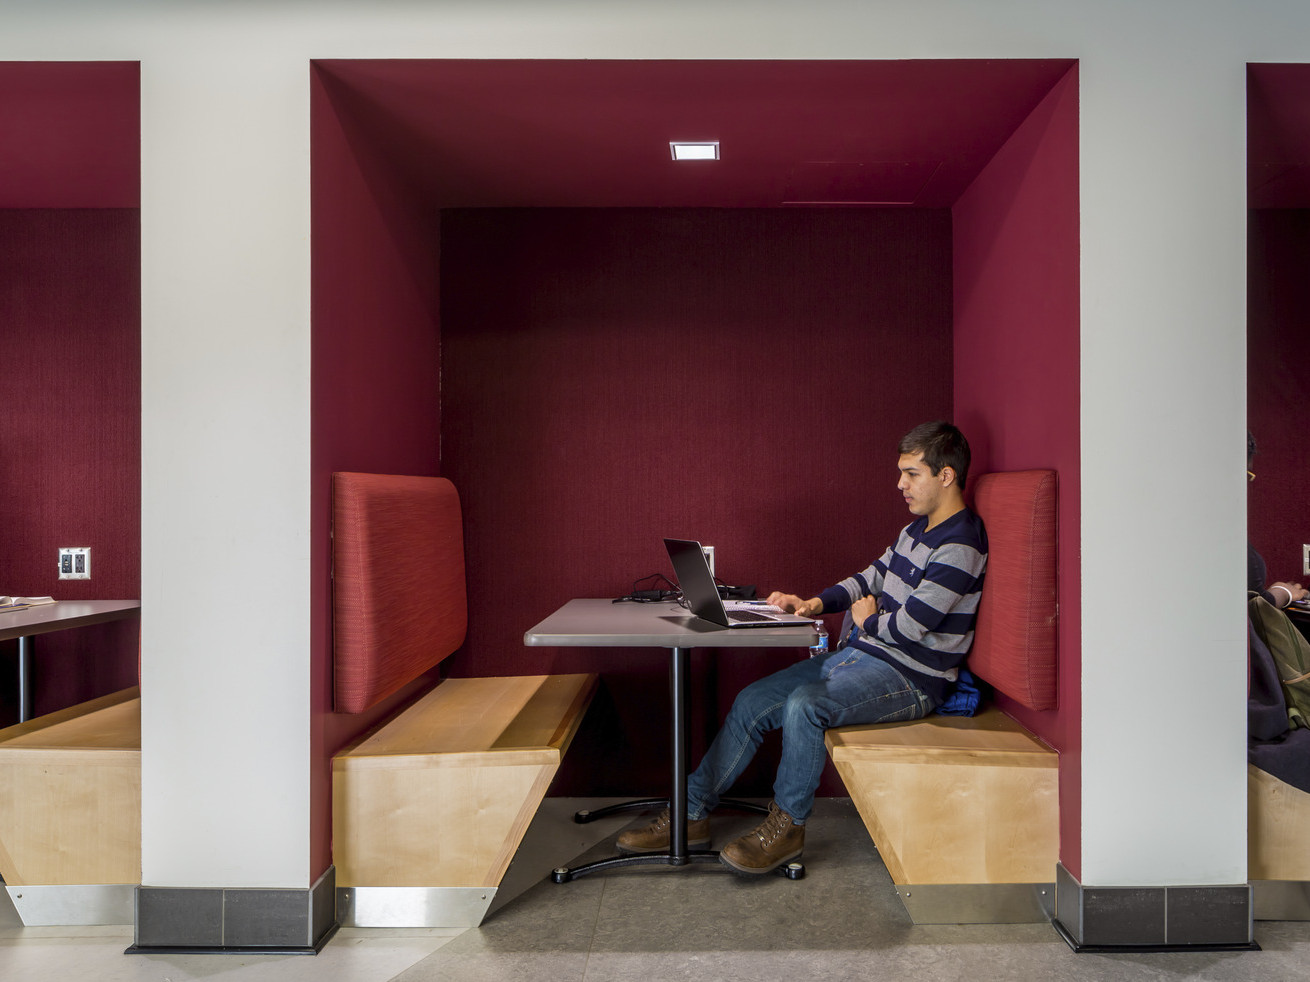 Tucked-in booths for collaboration with wood benches and dark red accents at the University of Minnesota cultural center